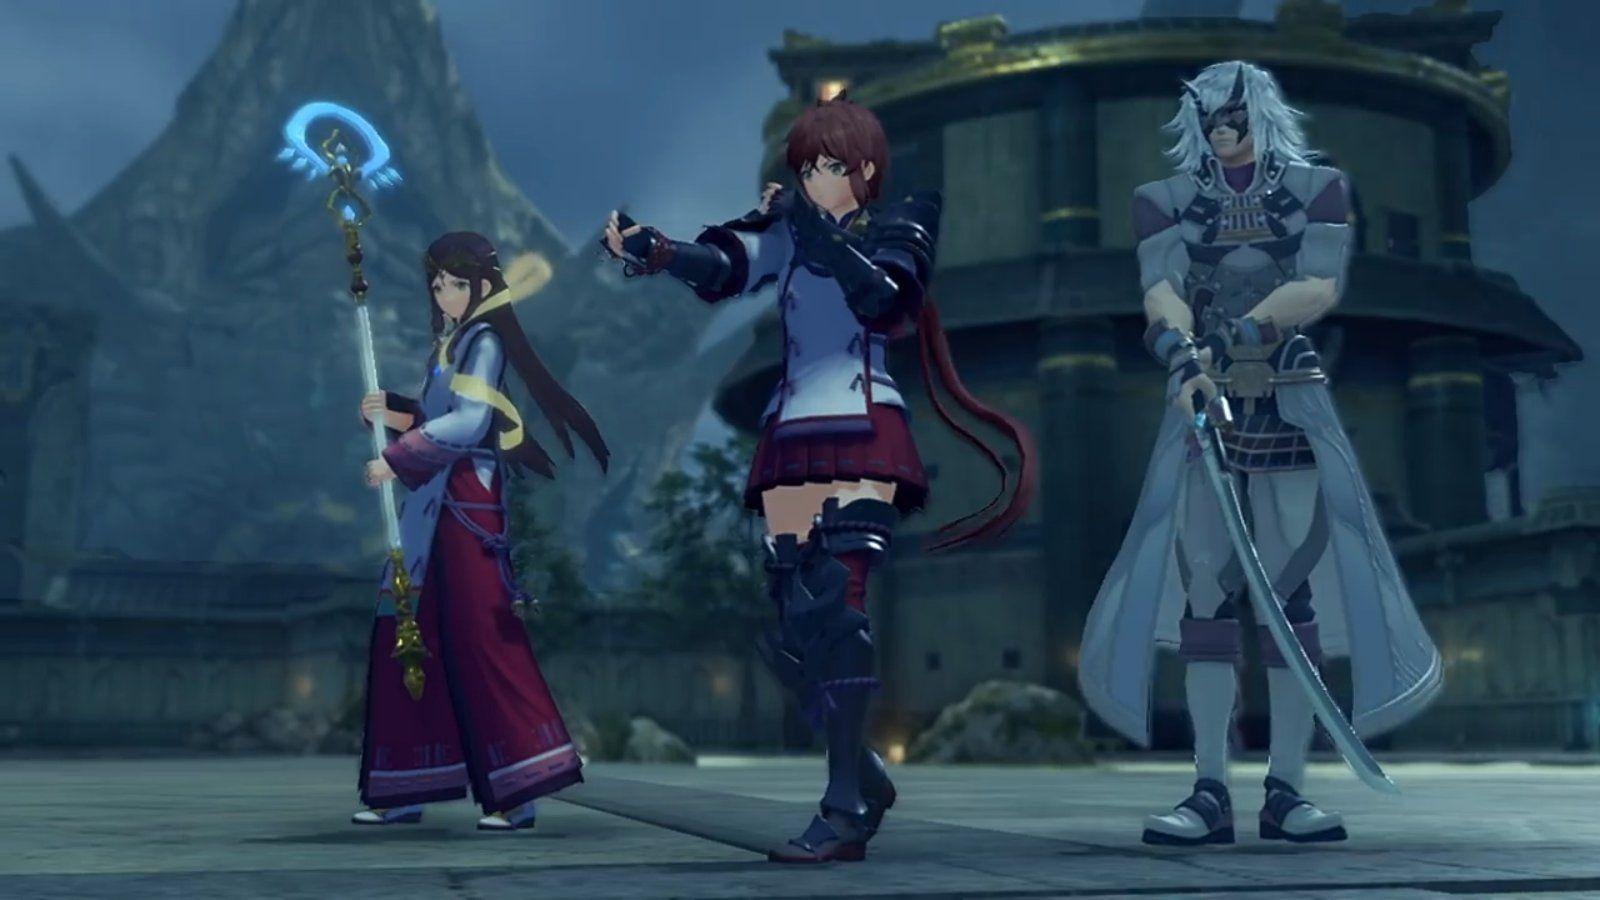 Xenoblade Chronicles 2: Torna The Golden Country receives new